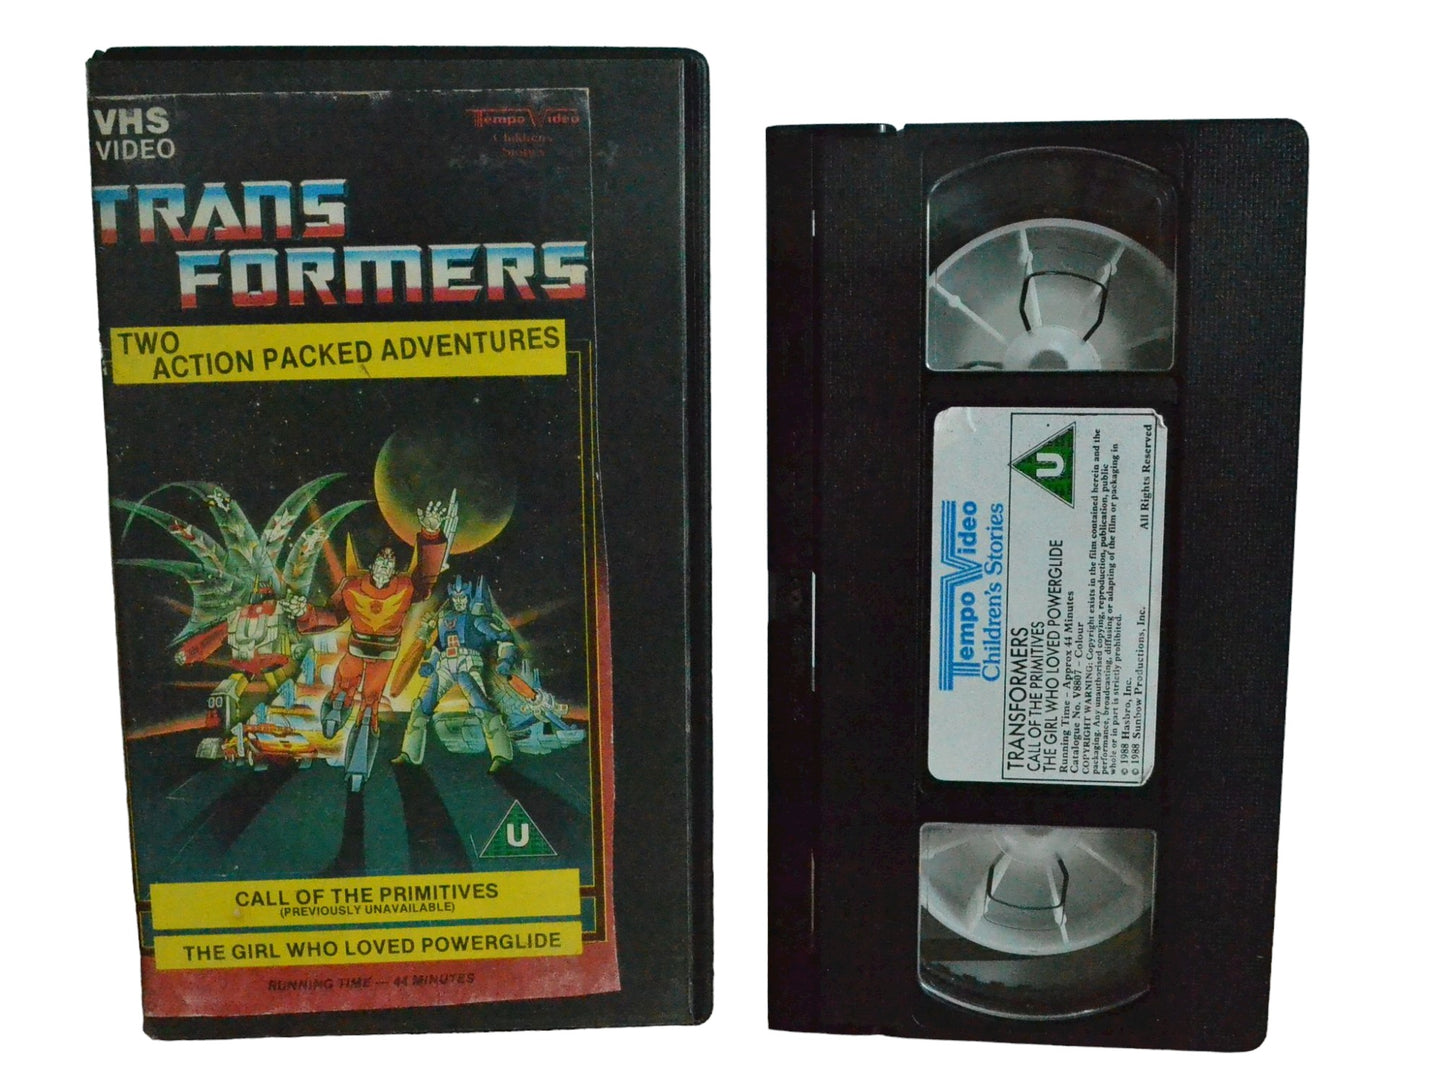 Transformers Two Action Packed Adventures [Carton] Call Of The Primatives- Tempo Video - Childrens - PAL - VHS-